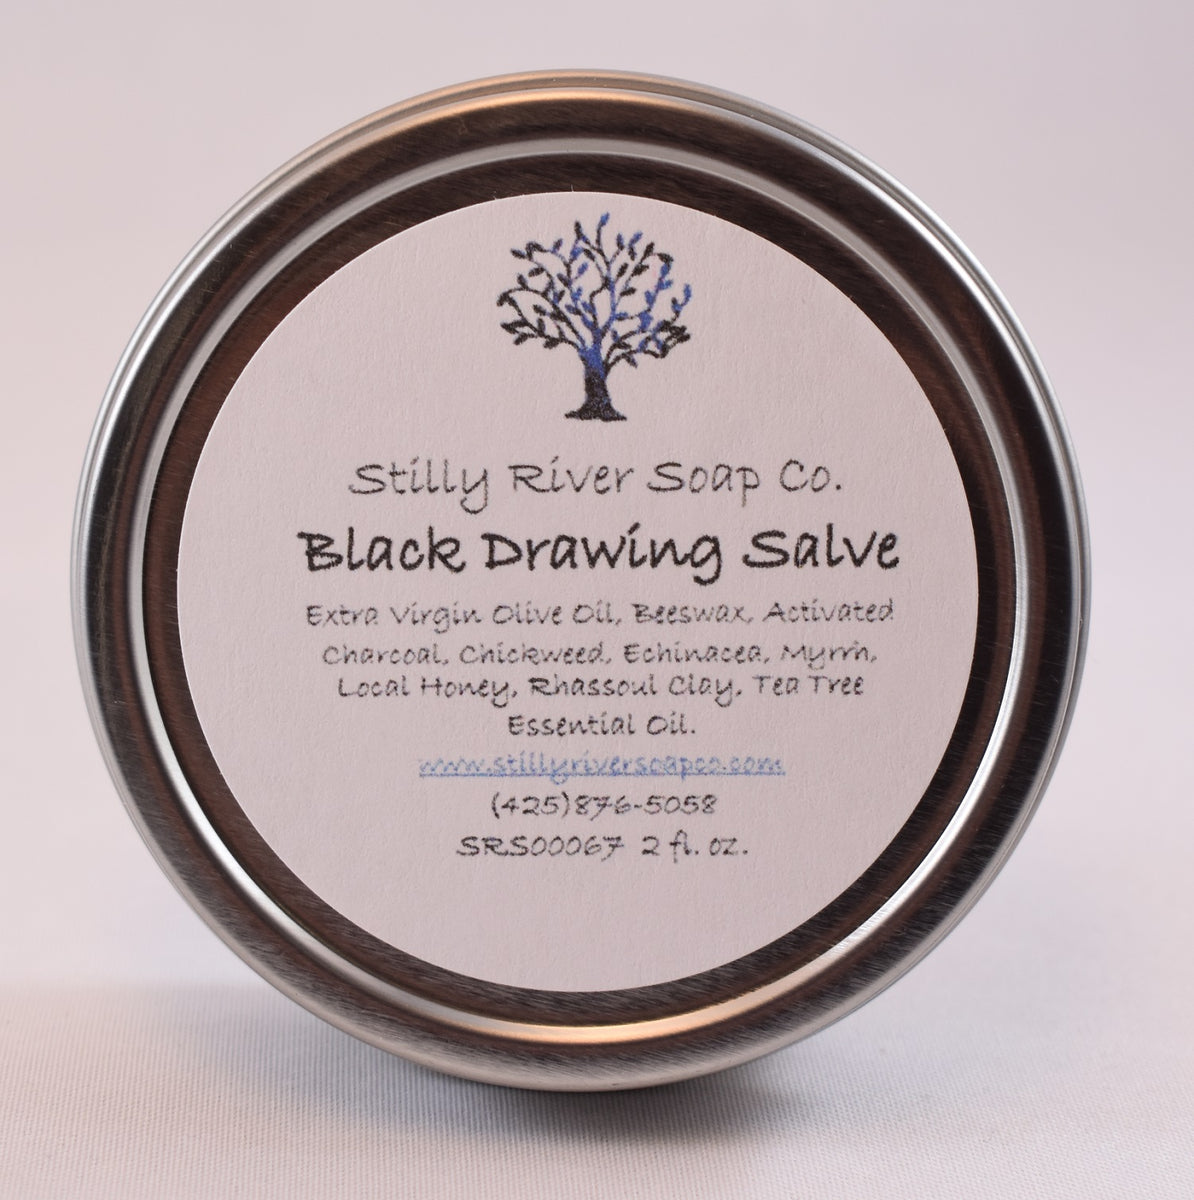 Black Drawing / Charcoal Salve – Stilly River Soap Co. Natural